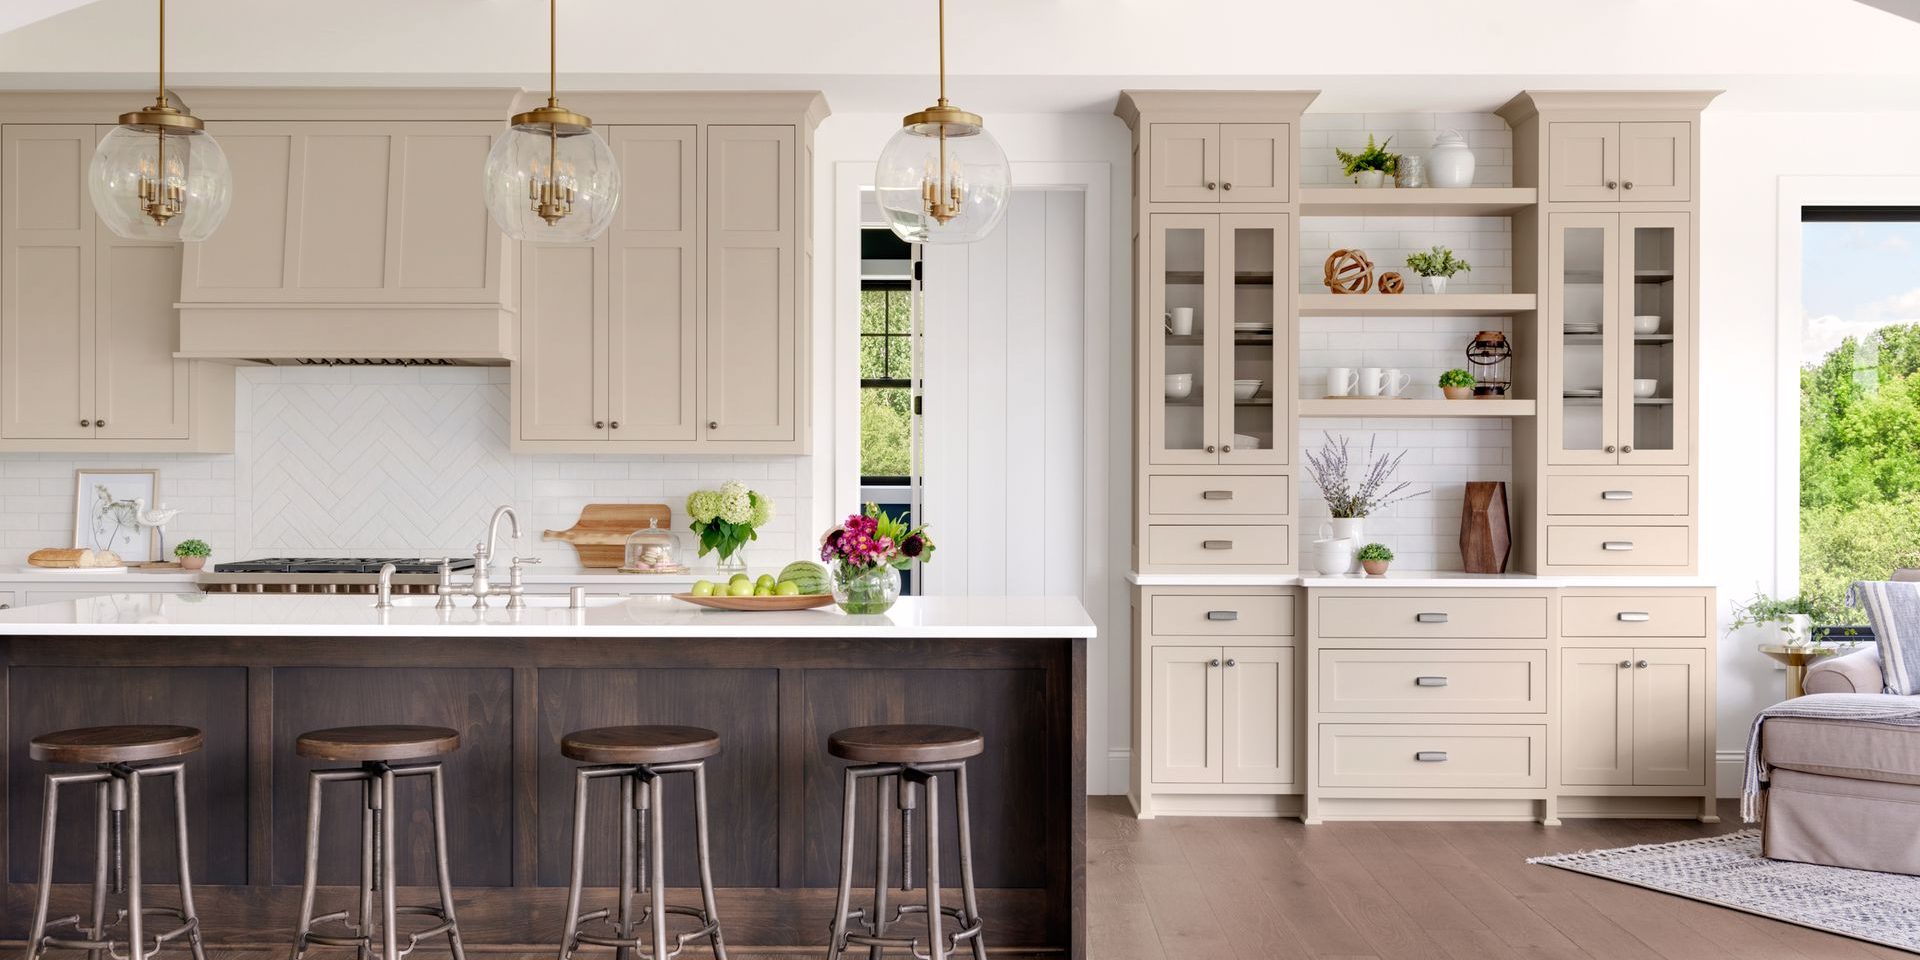 Is the kitchen the most important room of the home?